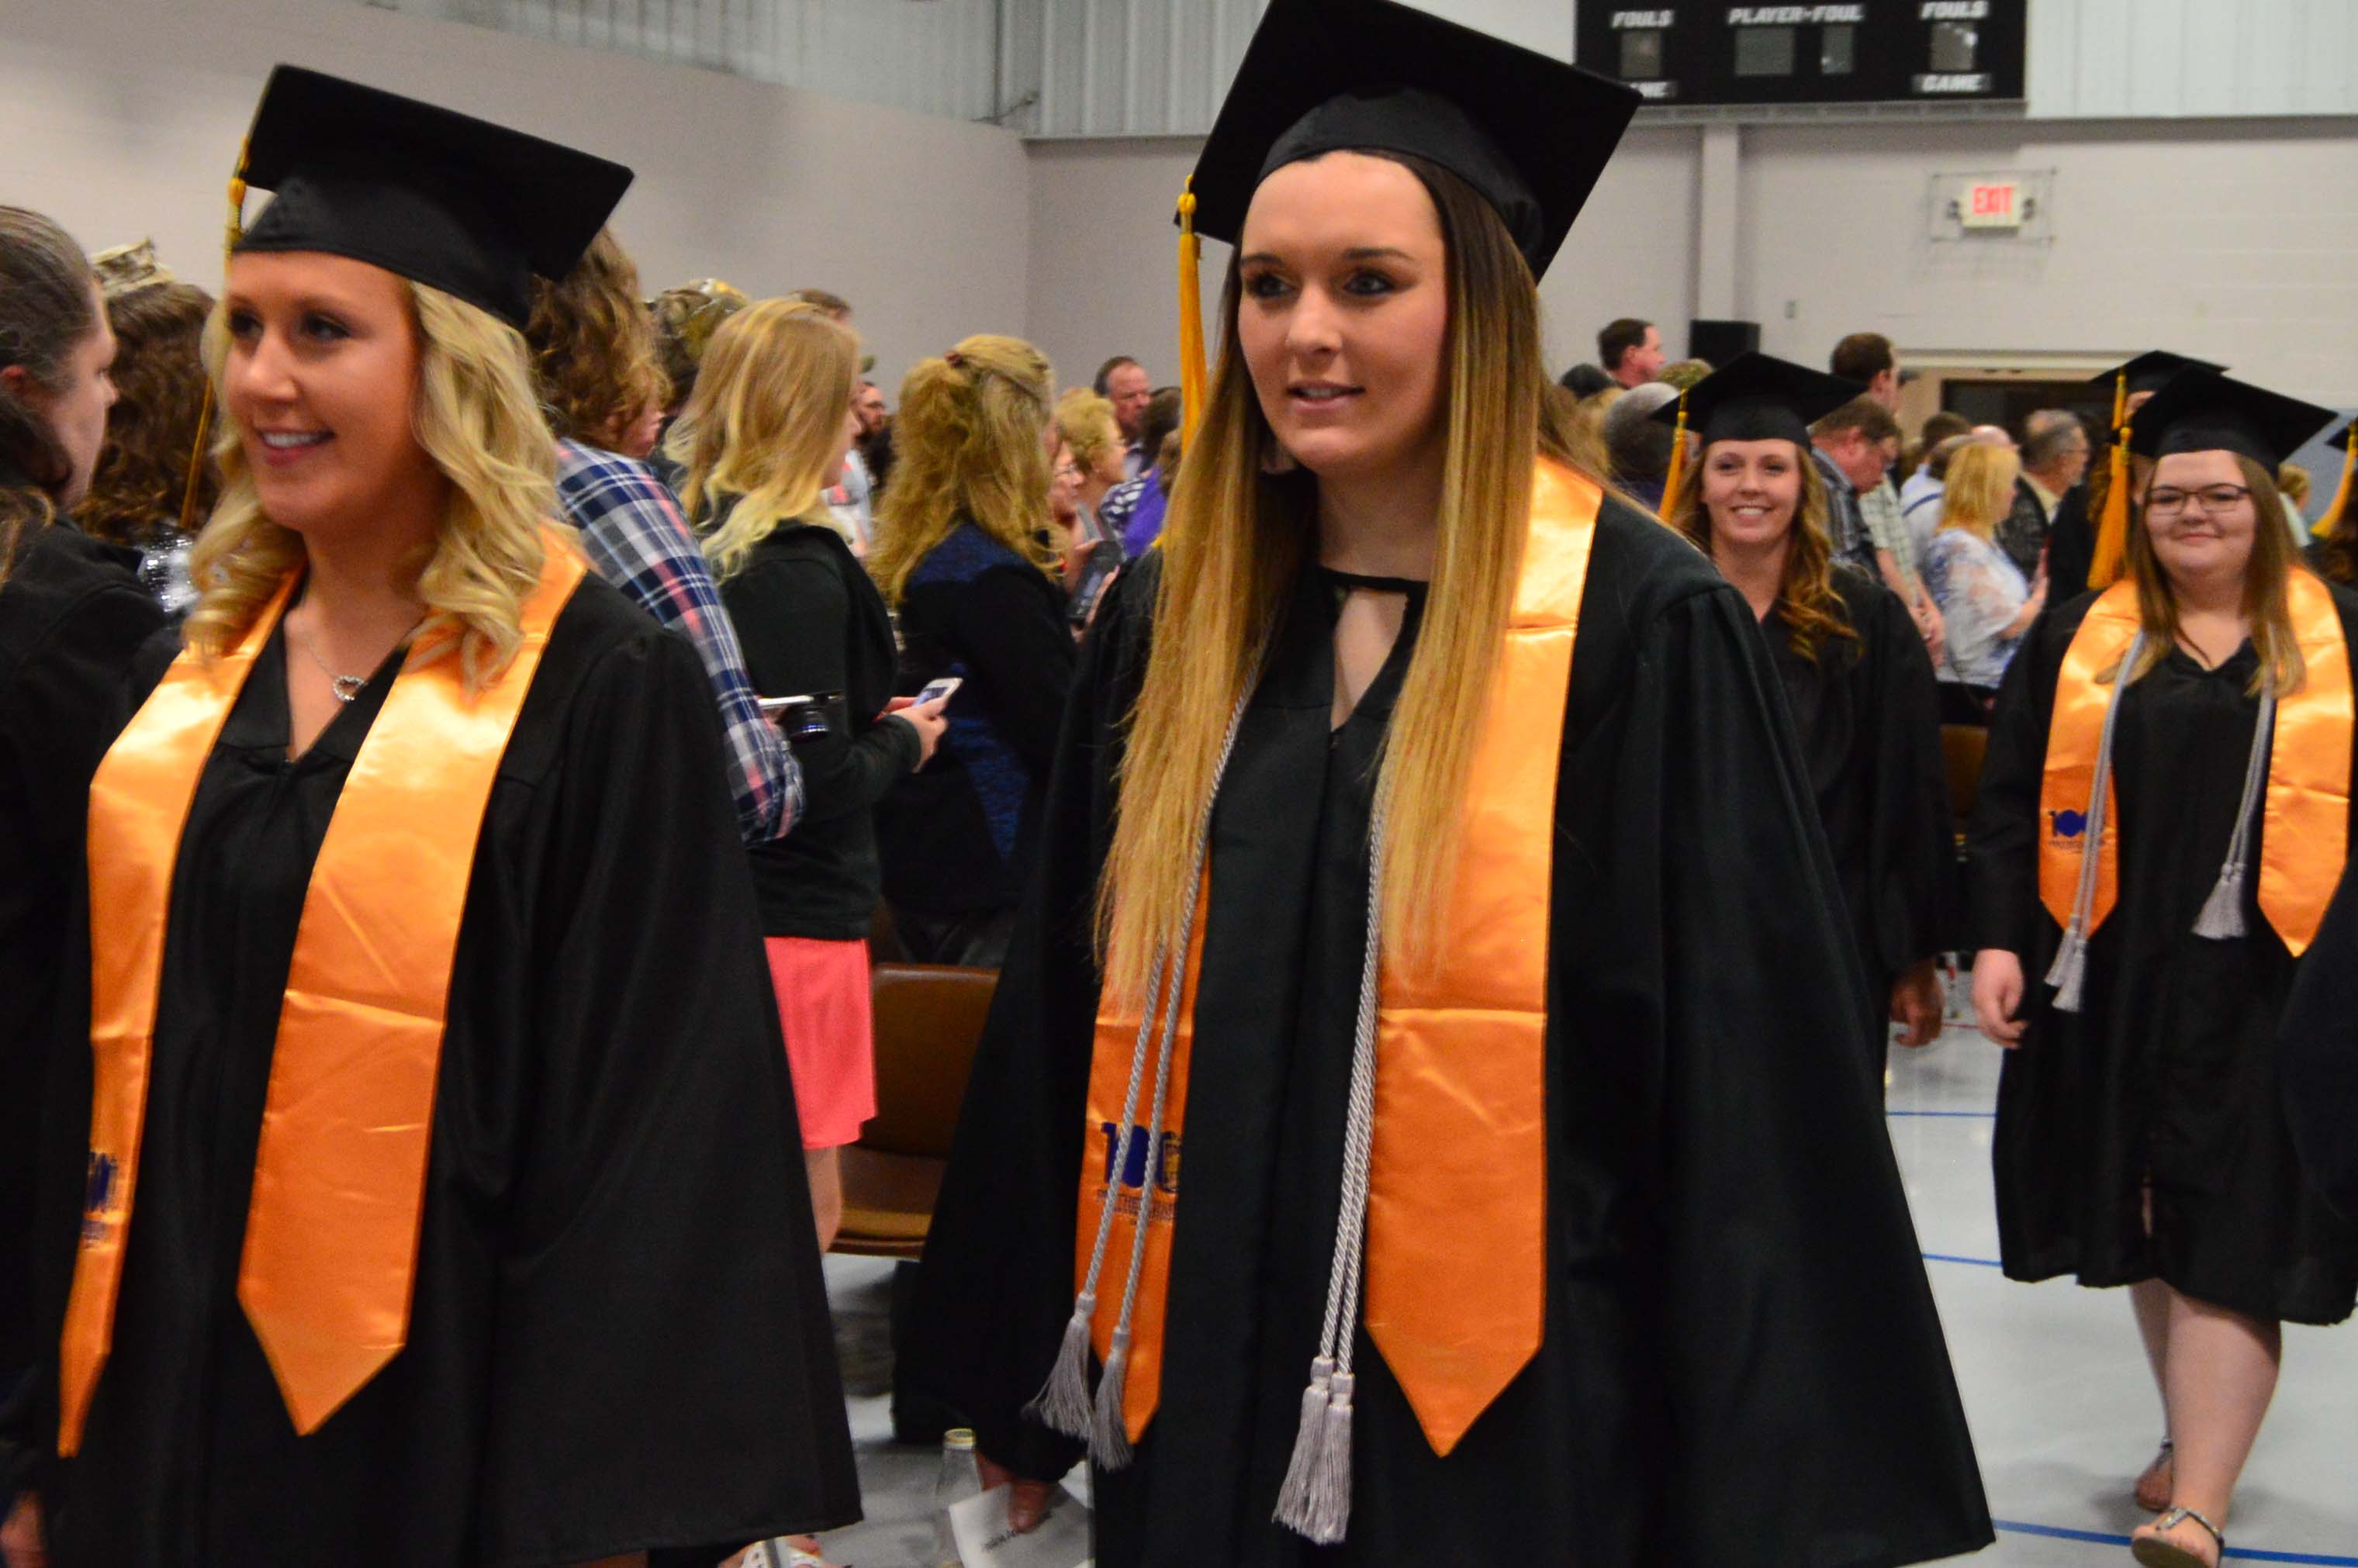 2018 PTK academic honorary graduates arrive for NCTA commencement. The public is invited to the 2019 Graduation on Thursday, May 2 at 1:30 p.m. in Curtis. (Crawford/NCTA News photo)